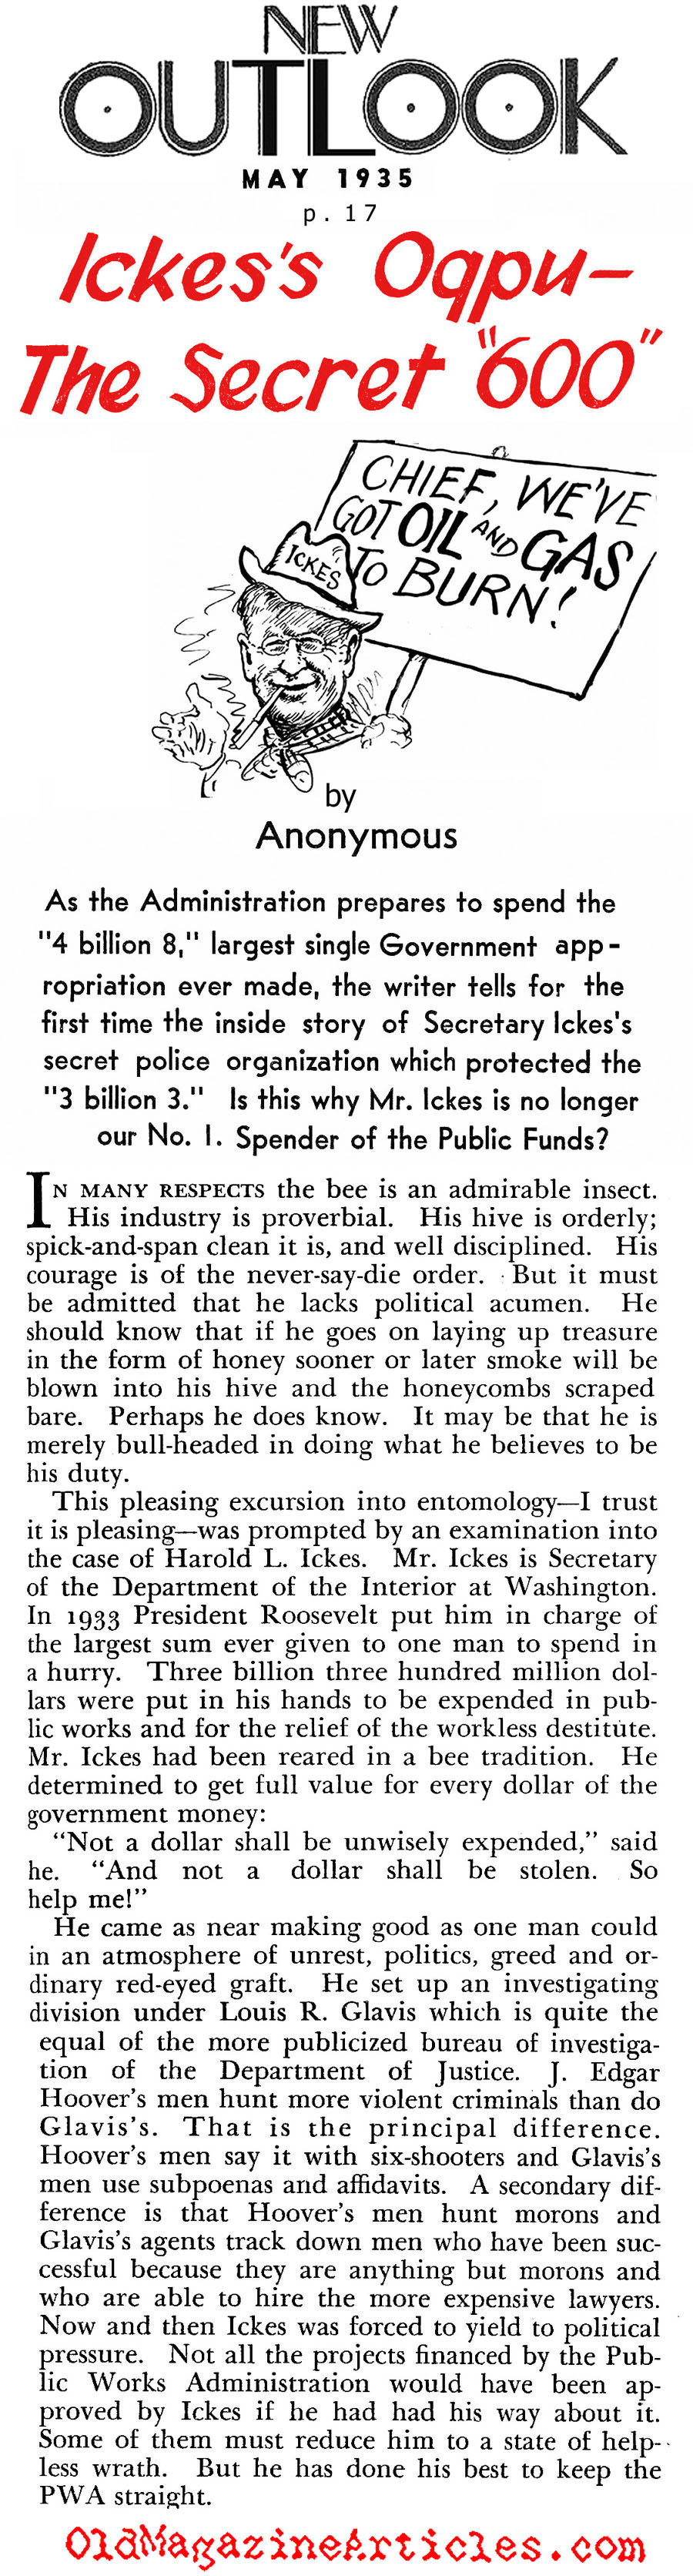 Harold Ickes Wrote the Relief Checks (New Outlook, 1935)